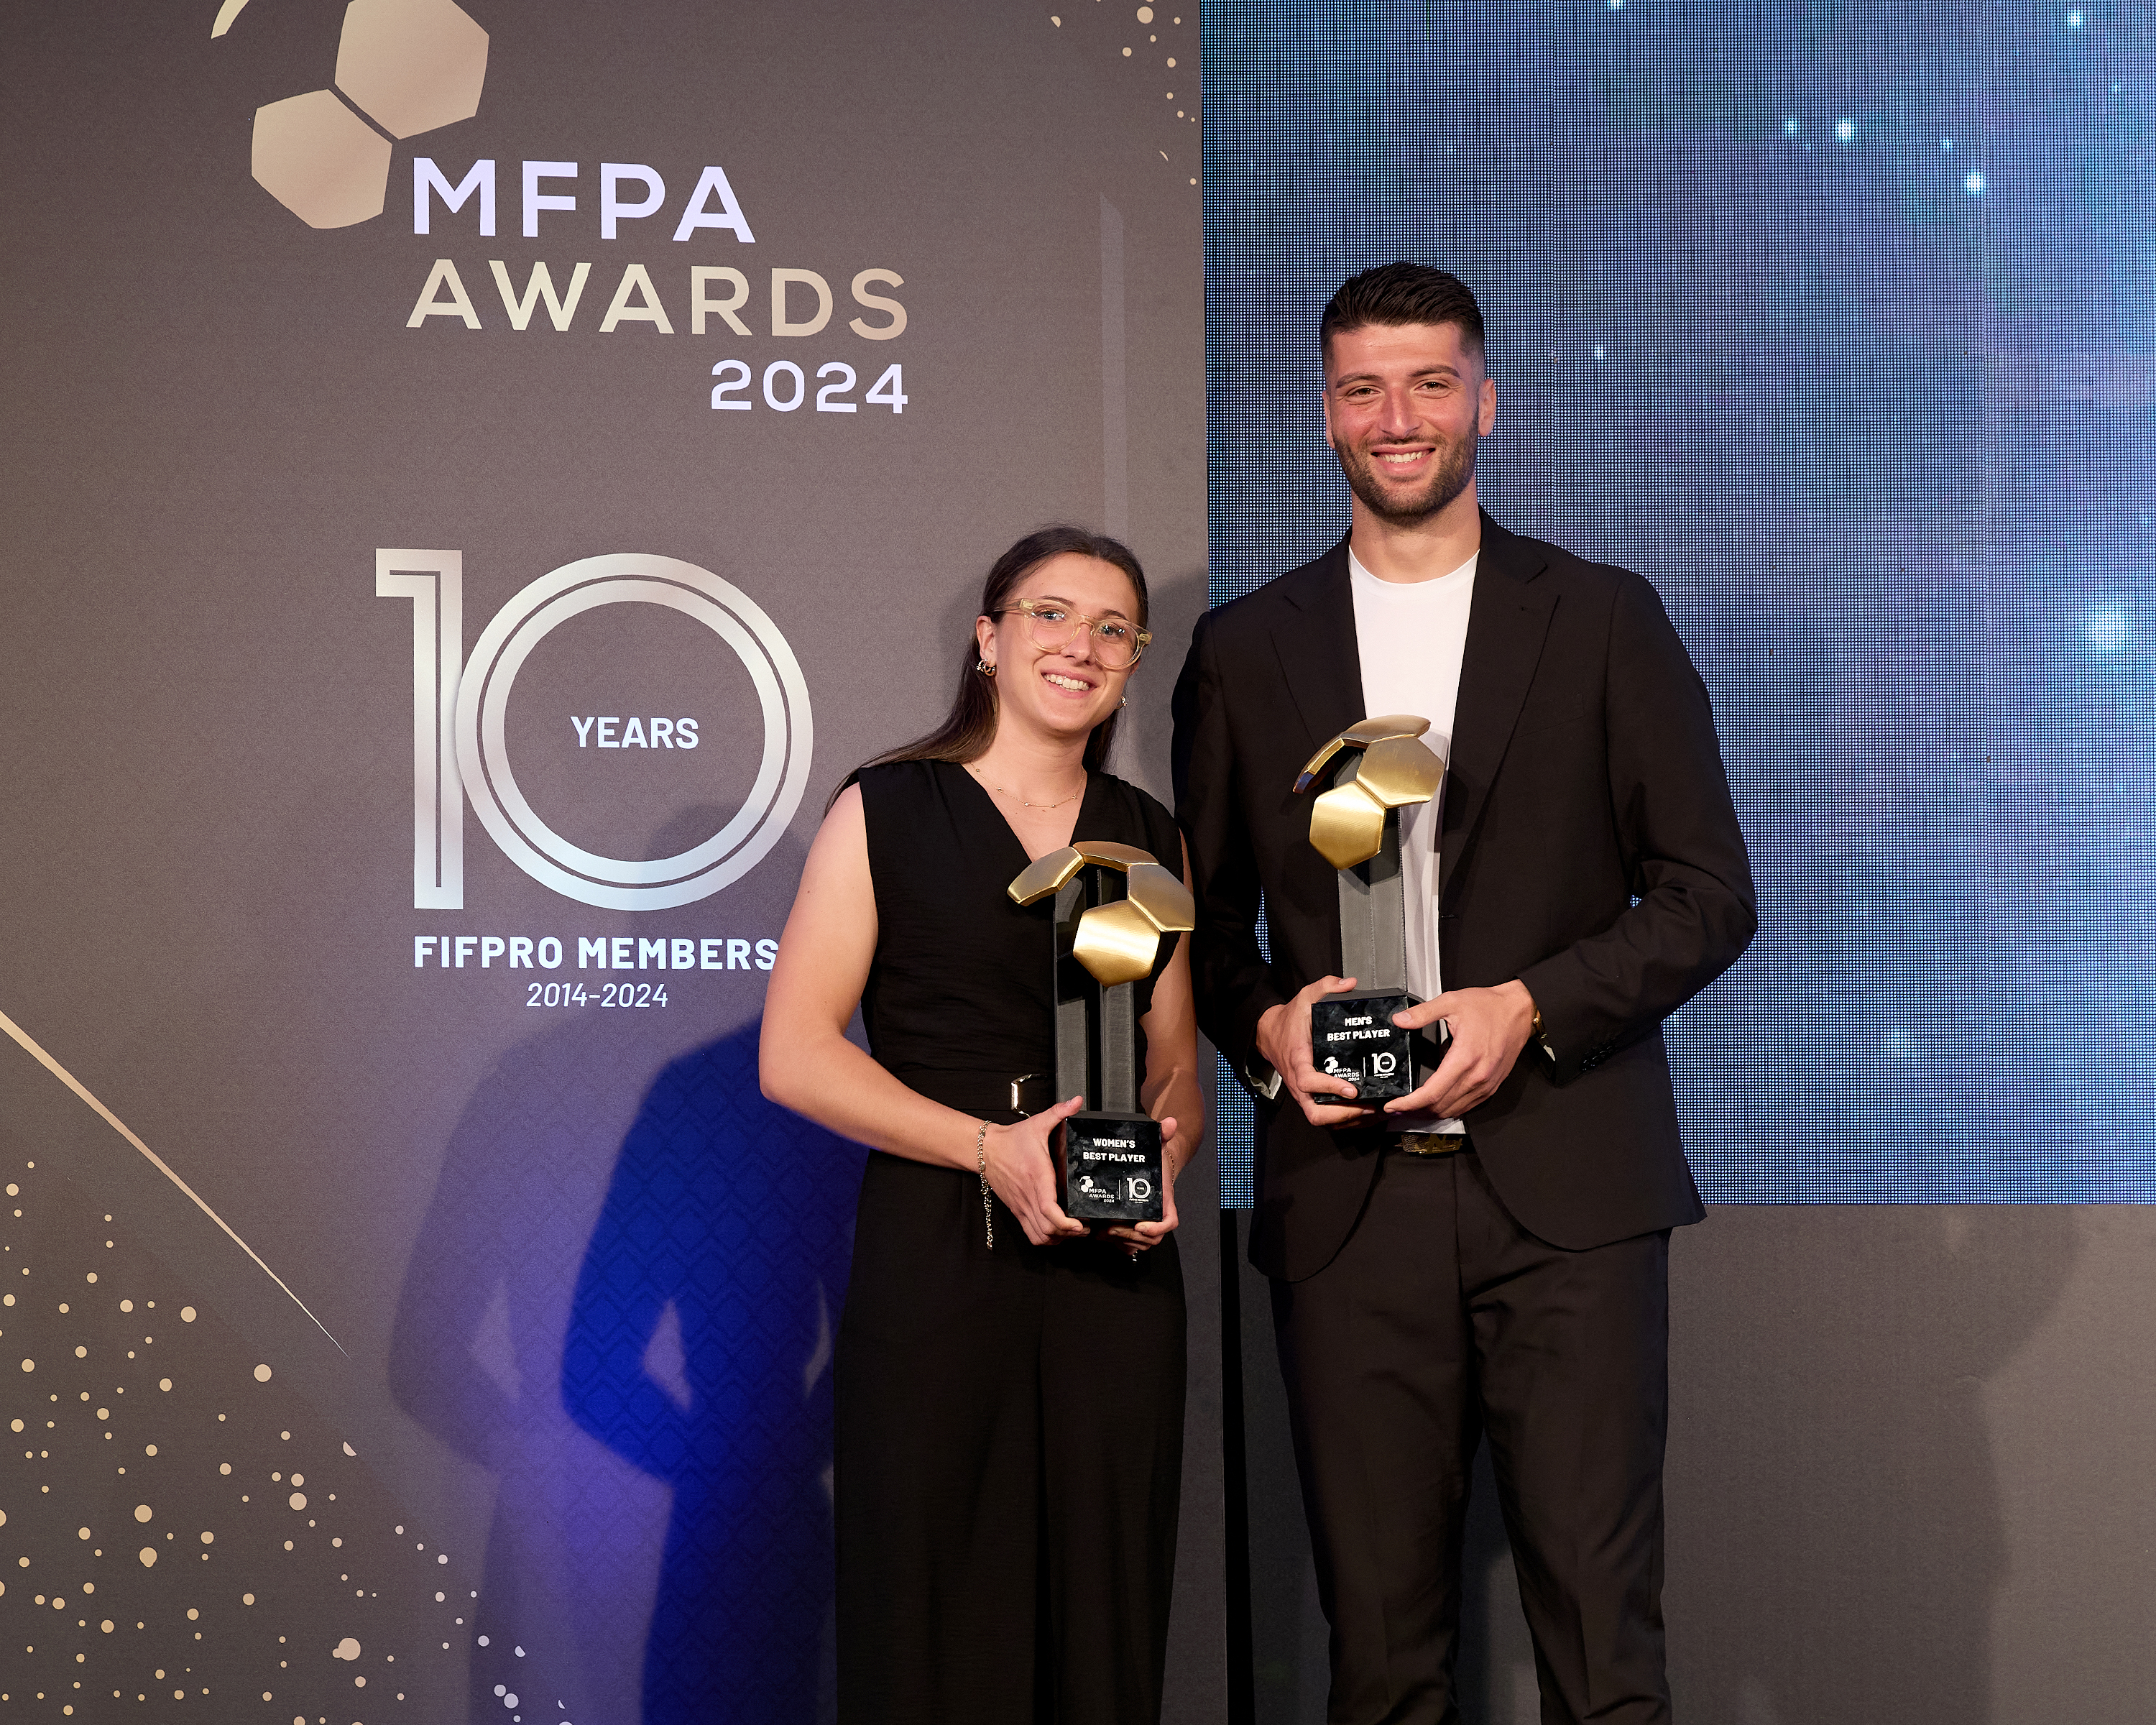 Montebello and Grosso win top honours  at MFPA Awards 2024